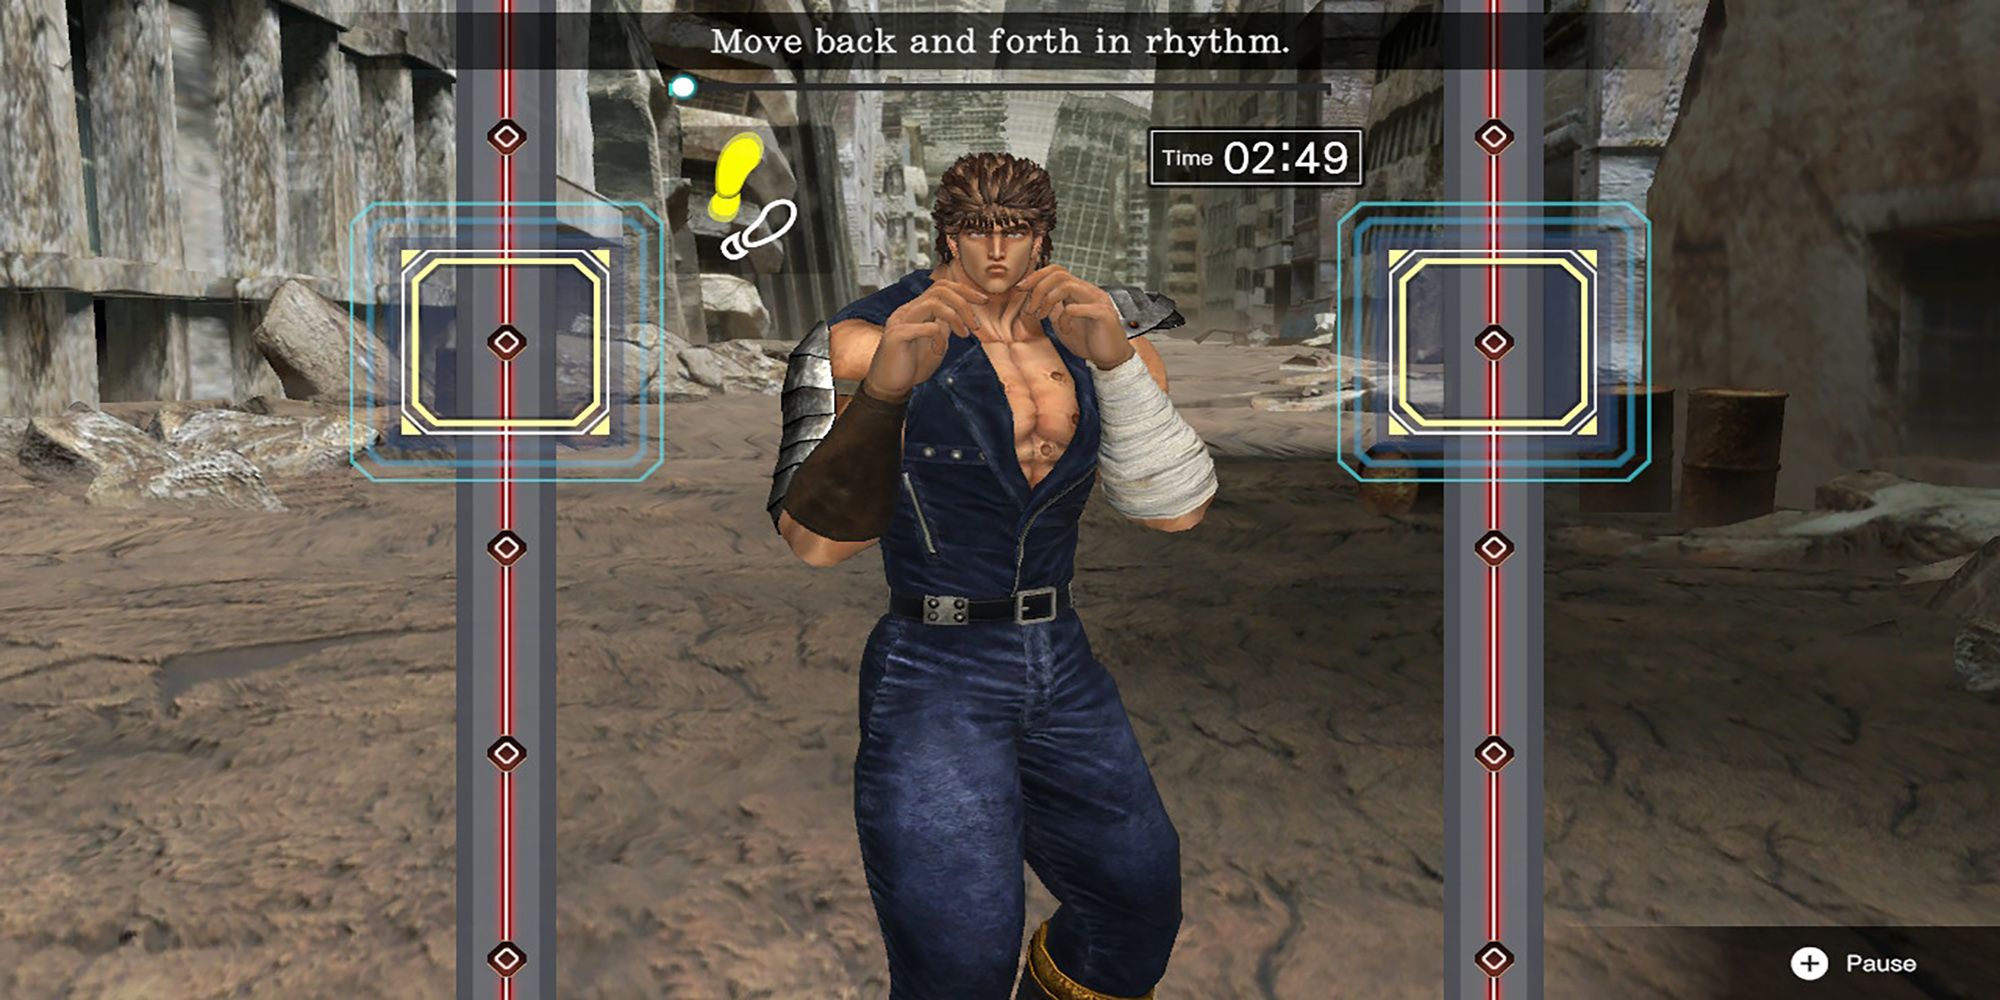 Kenshiro instructs the player to move back and forth in rhythm during an apocalyptic fitness class in Fitness Boxing: Fist Of The North Star.